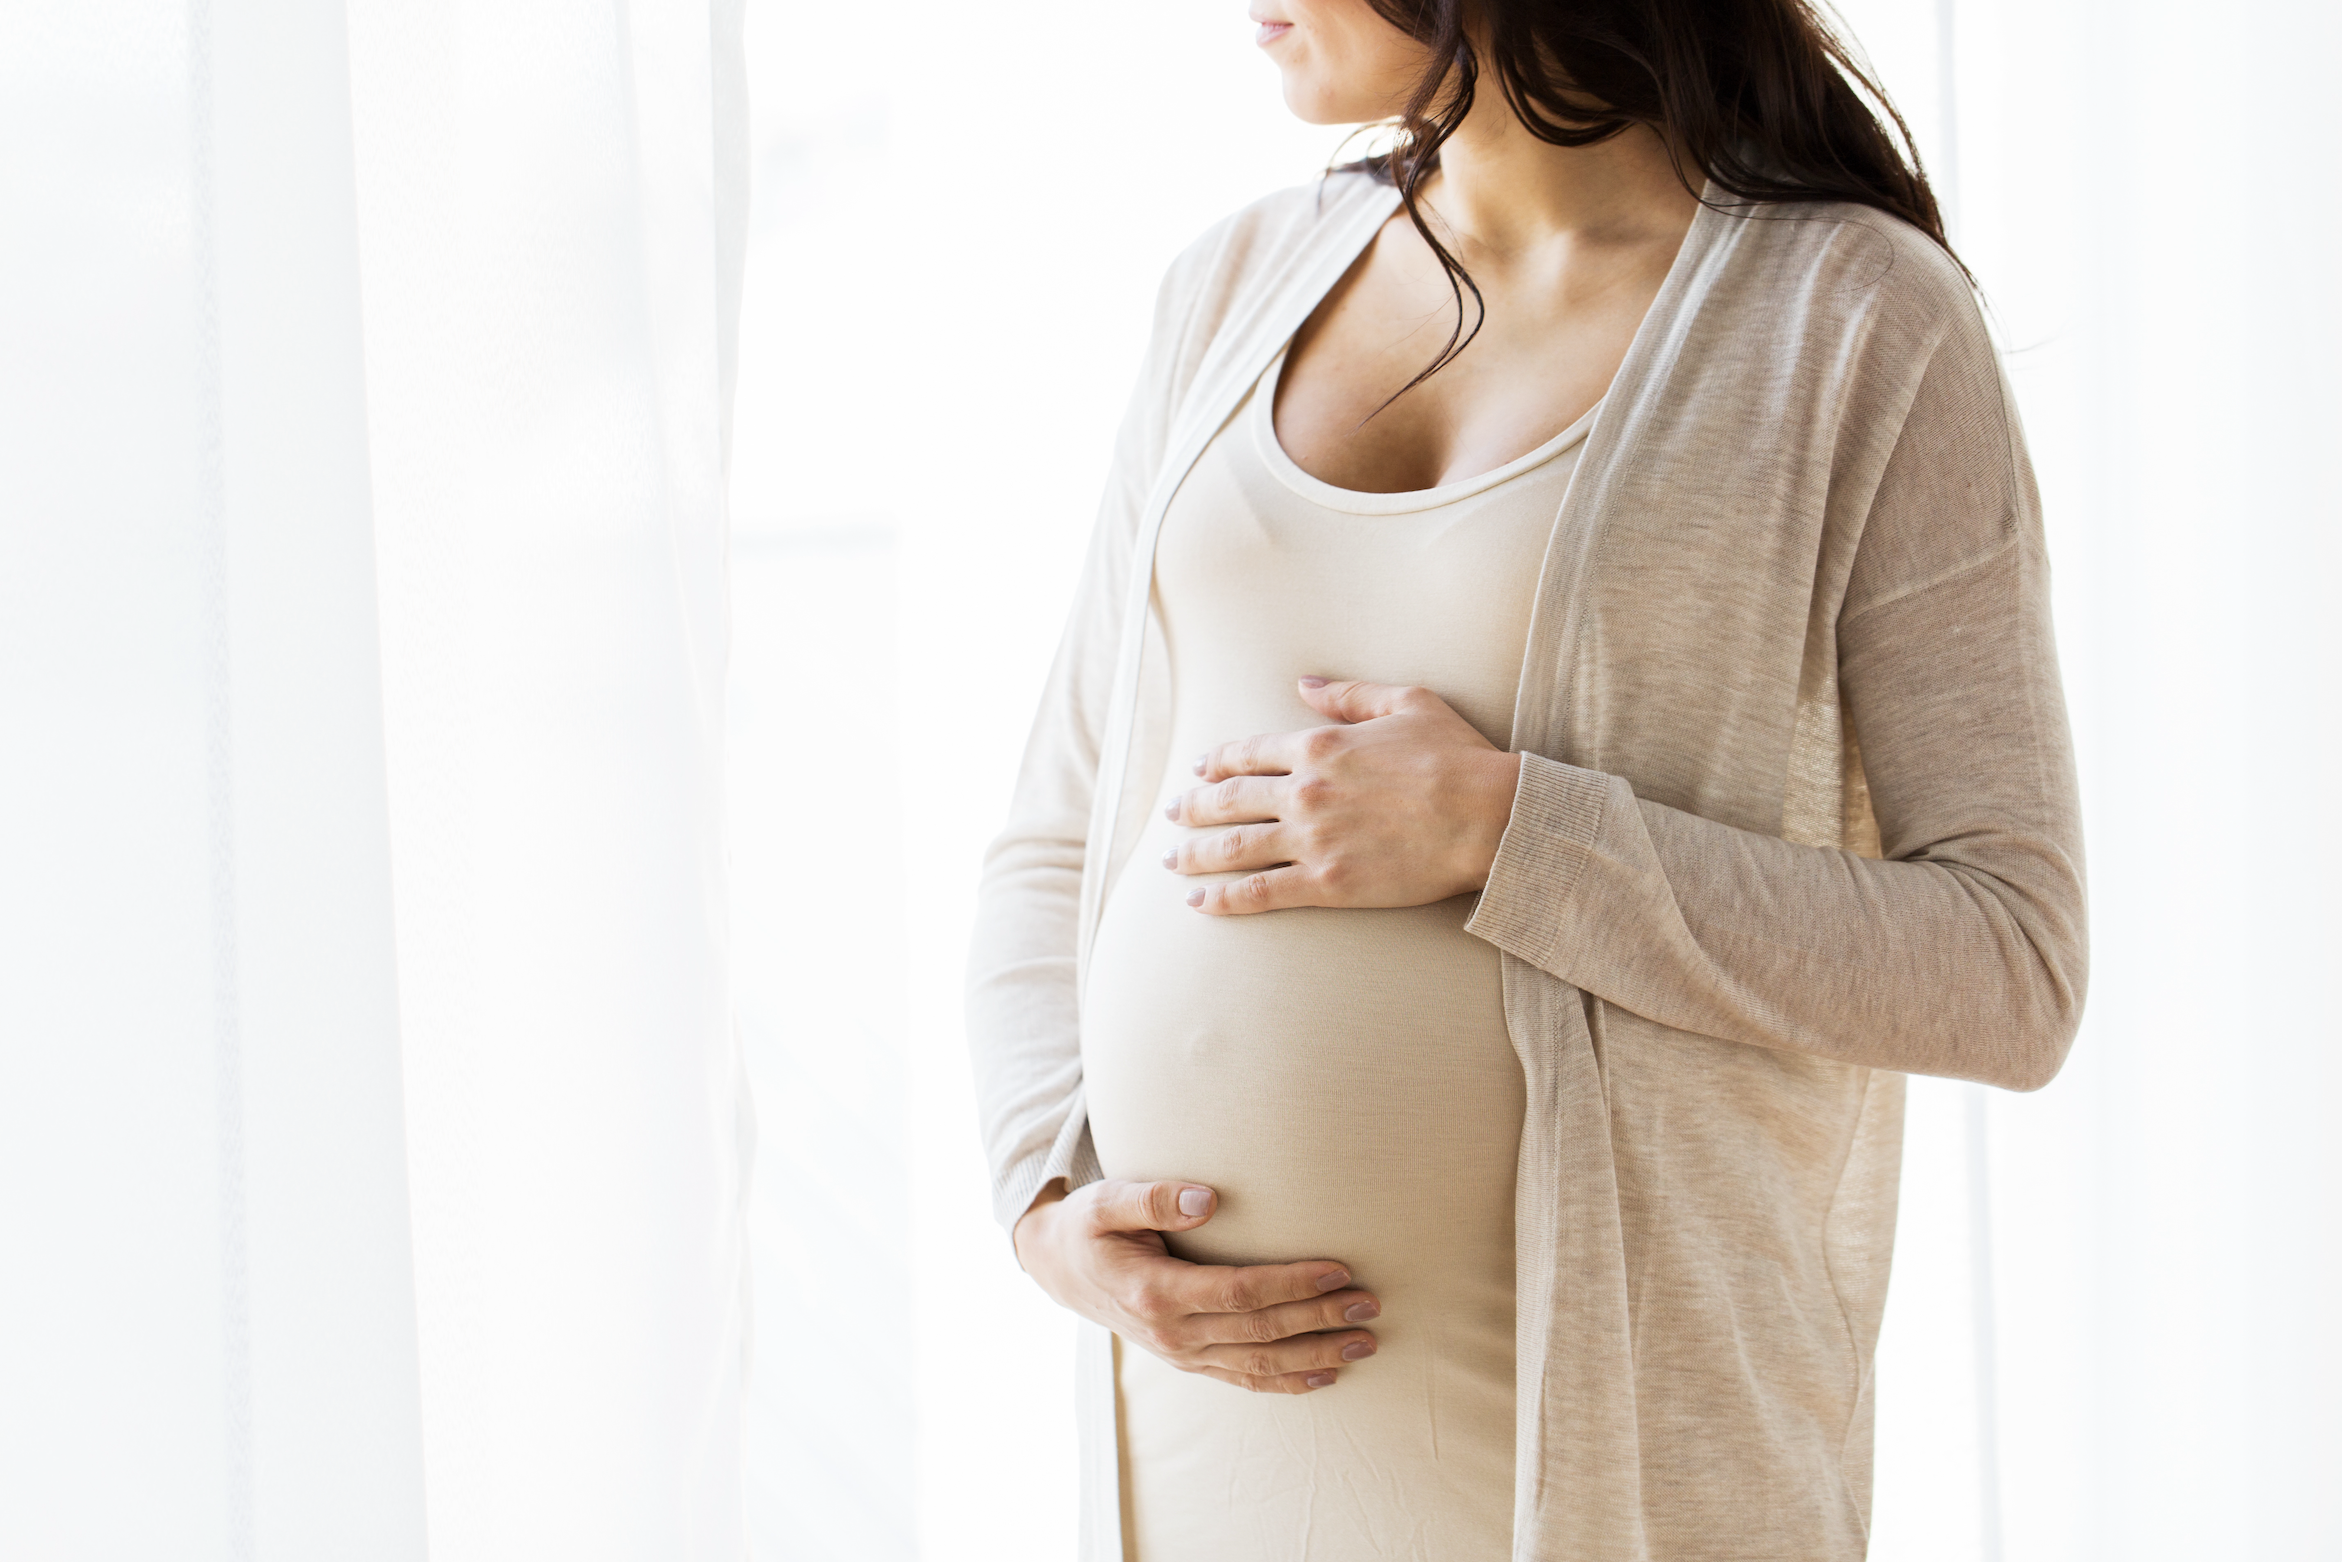 A close-up shot of a pregnant woman who is cradling her stomach while looking out the window to her right.